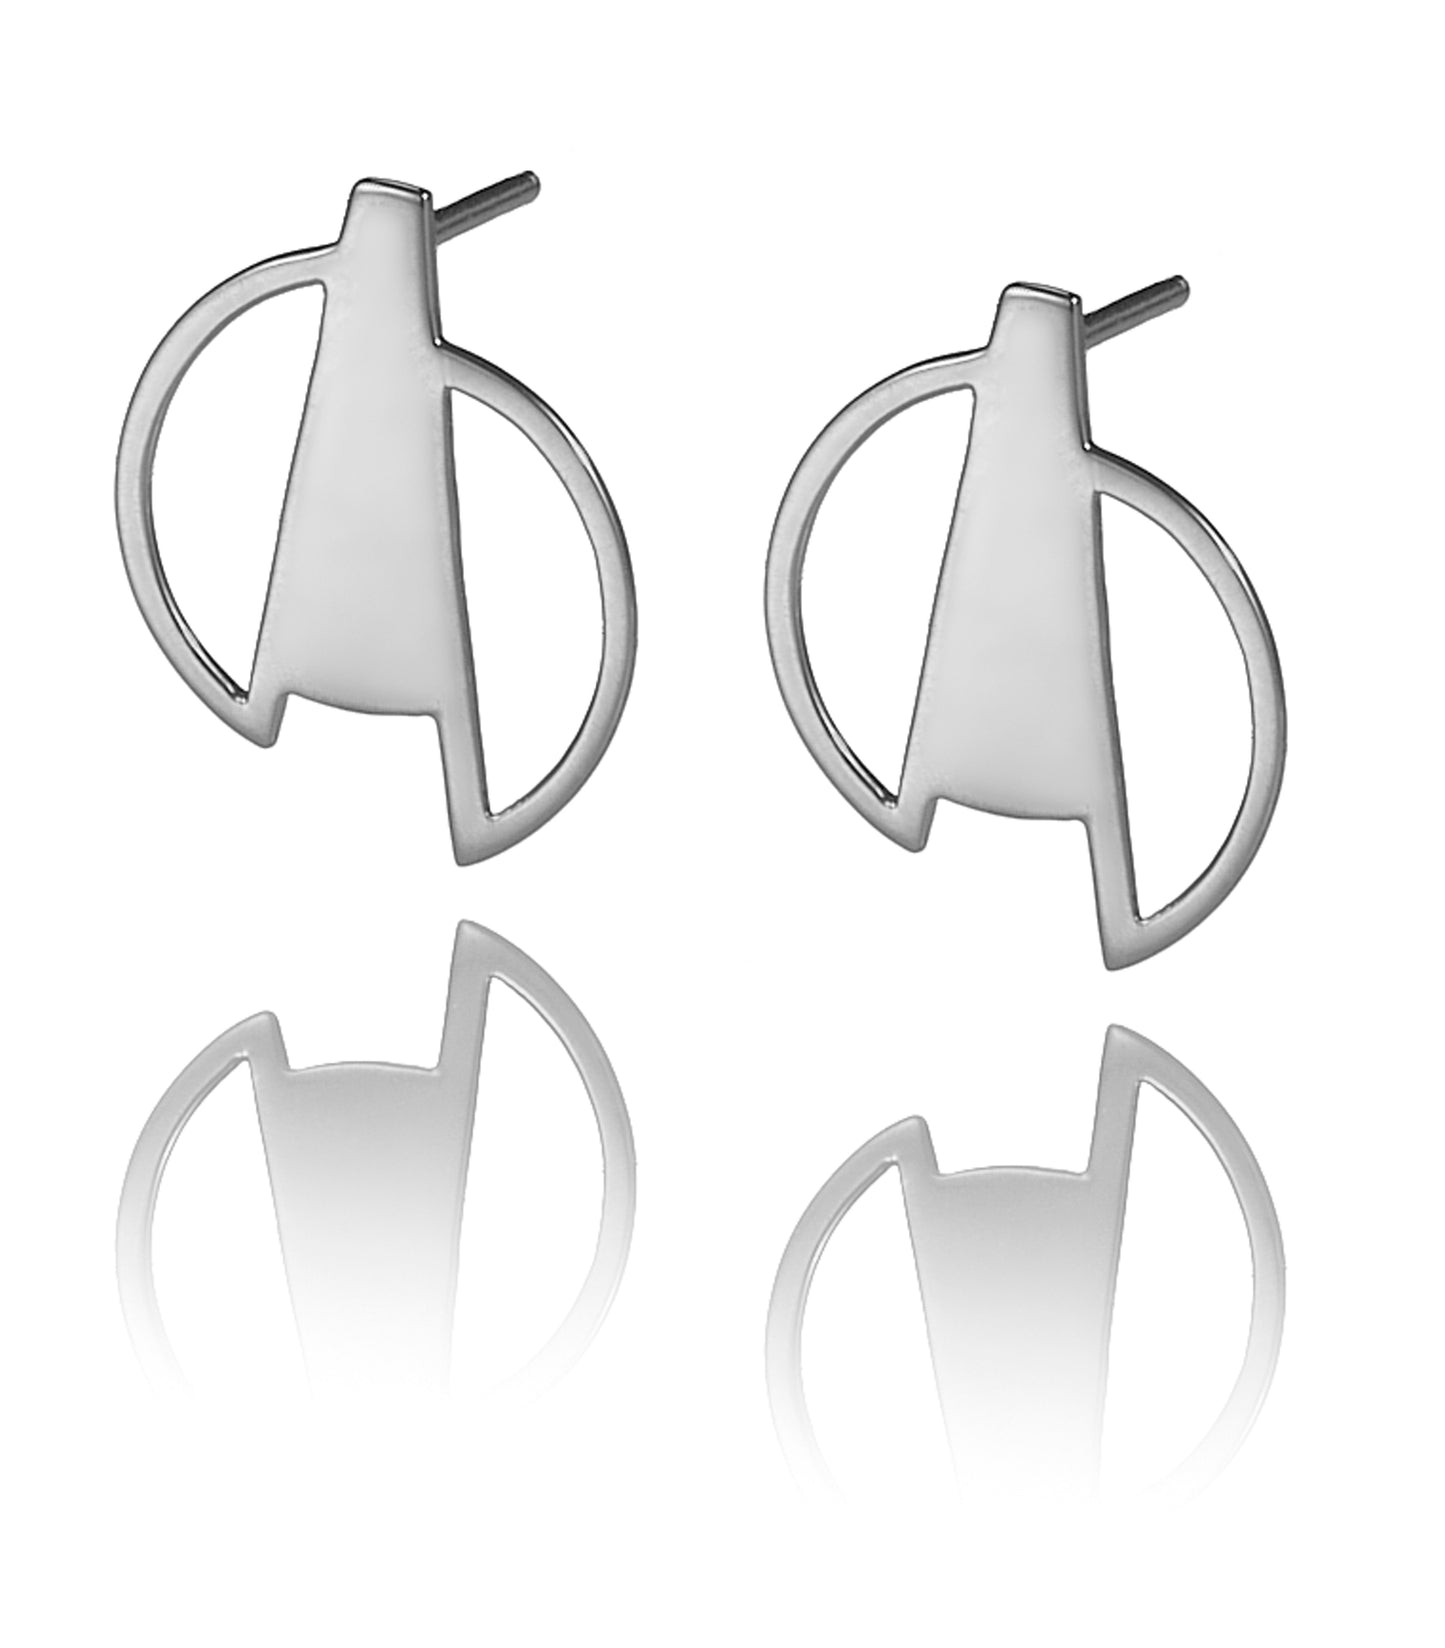 Minimalist earrings from Drift collection. This design represents deconstructed circles and is inspired by the imperfection of life.  Material: 925 silver. 